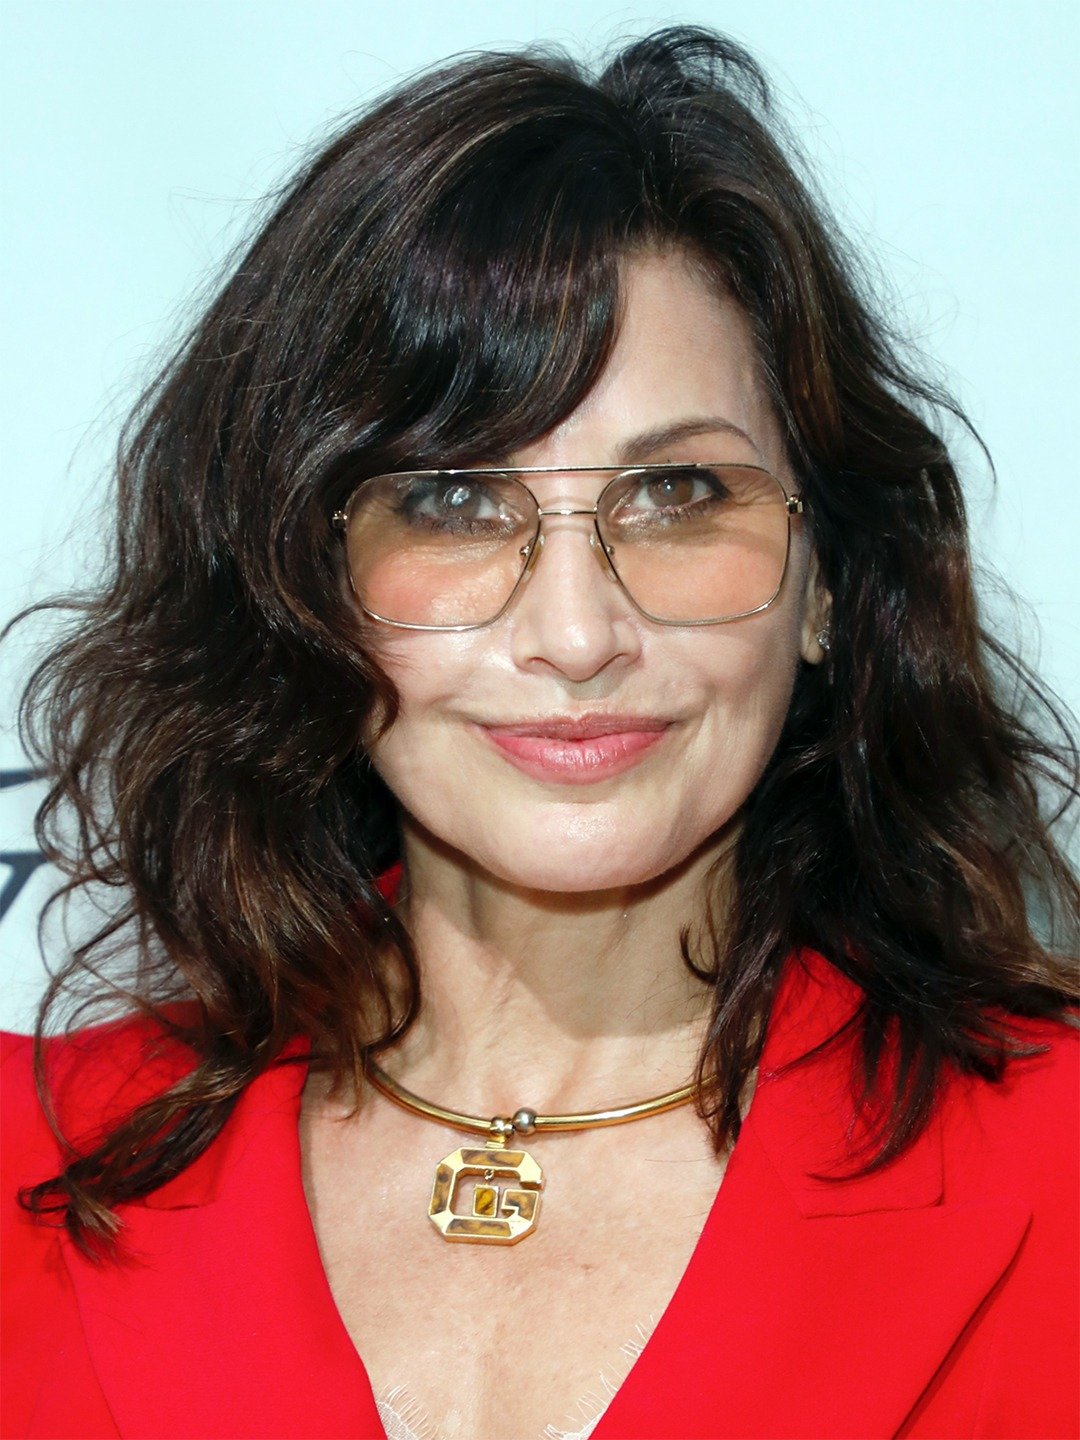 Pictures of gina gershon